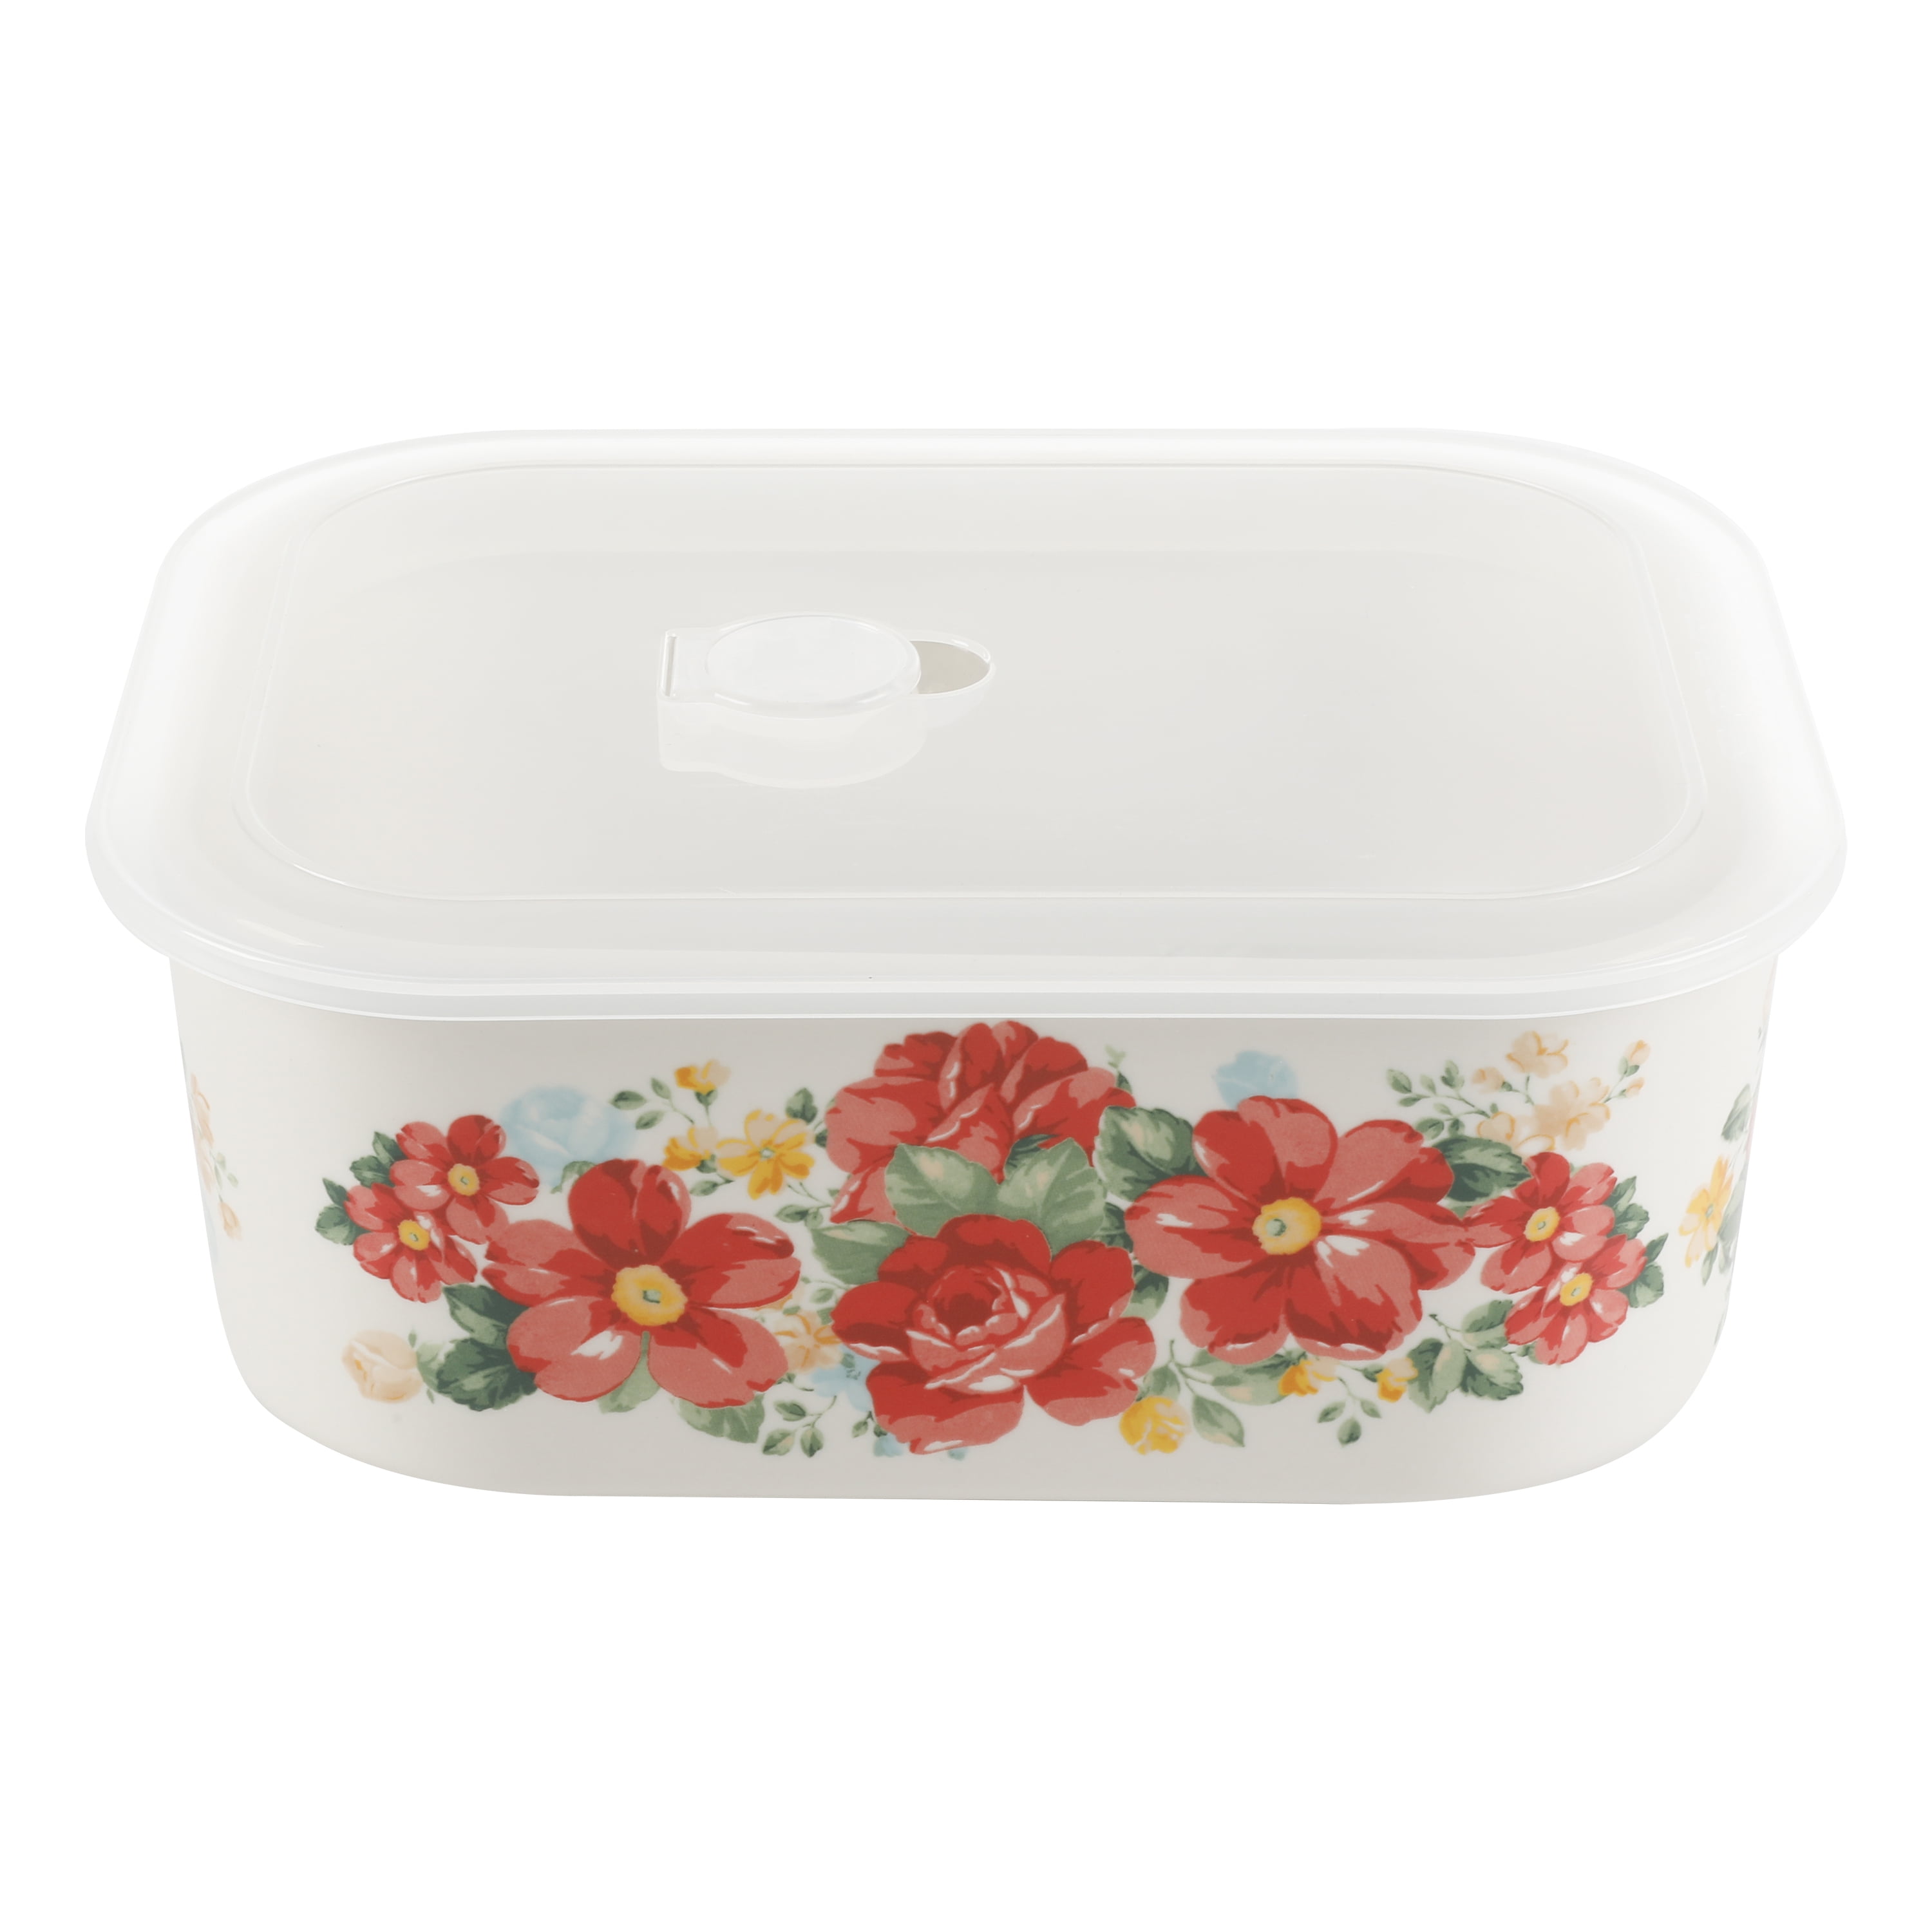 Pioneer Woman Storage Containers, $6.79 :: Southern Savers